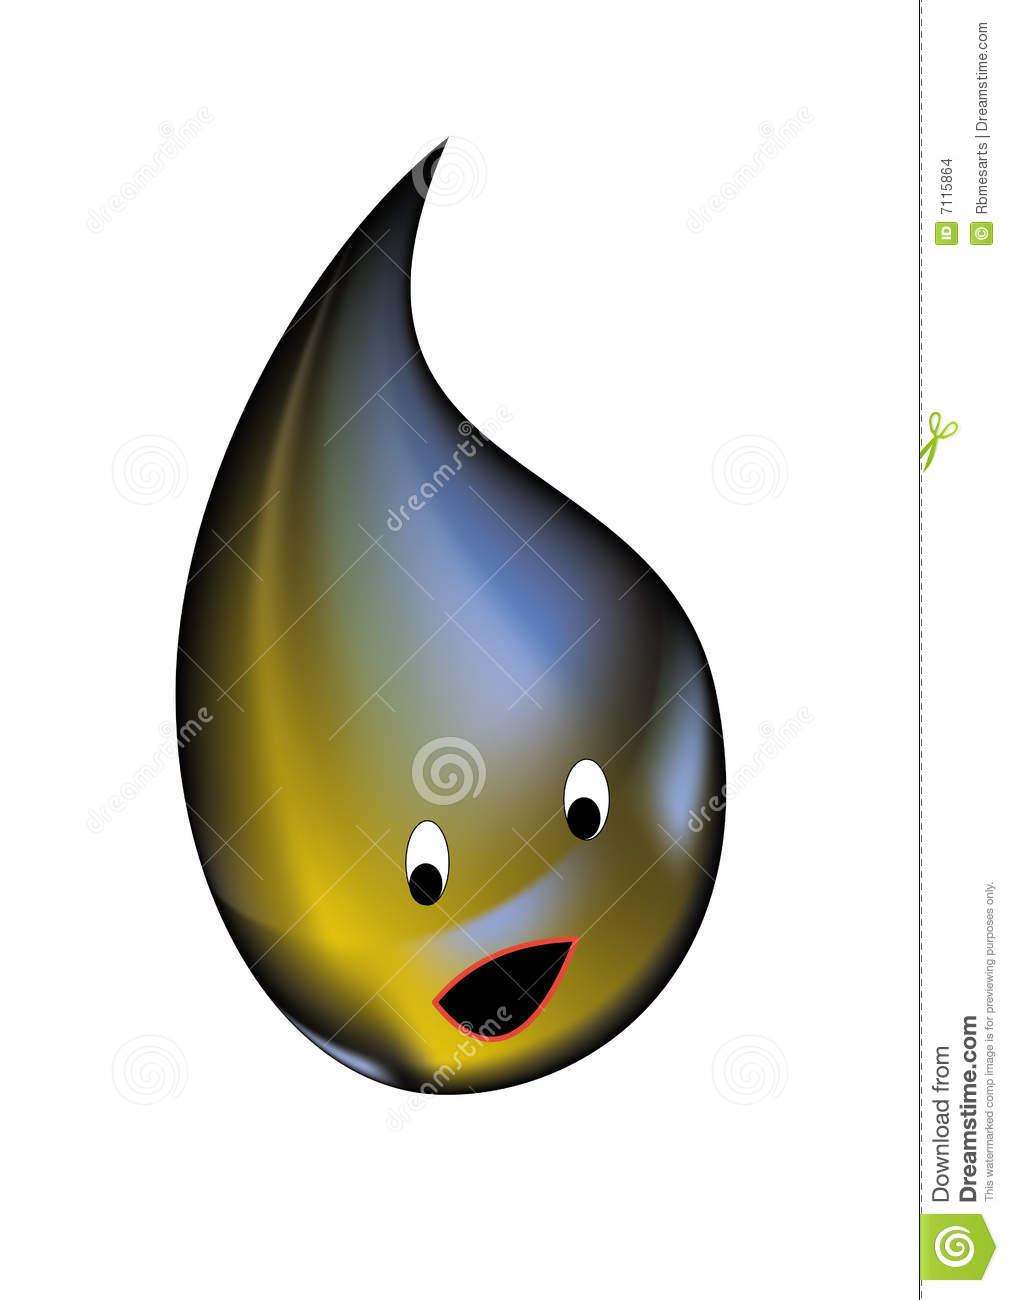 Oil Drop Stock Images   Image  7115864